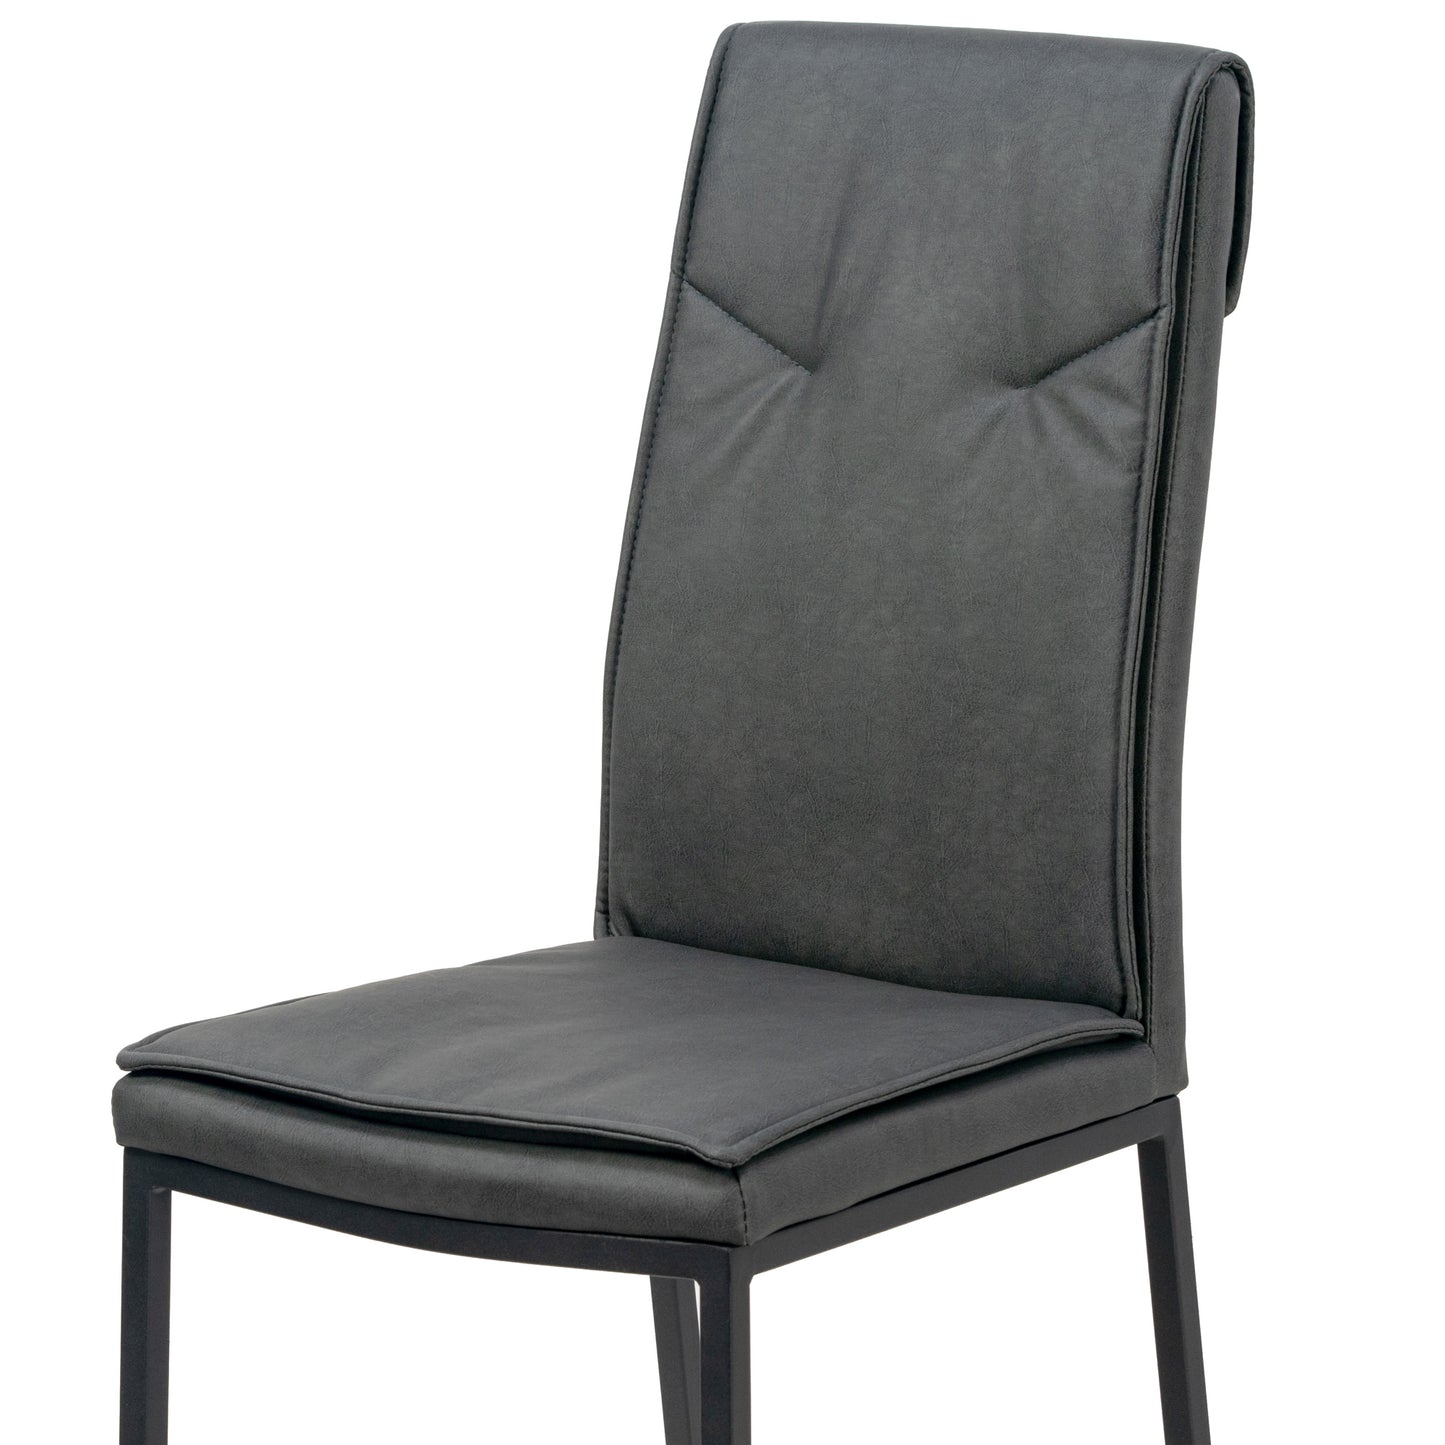 Set of 2 Aram Grey Distressed Faux Leather Dining Chair